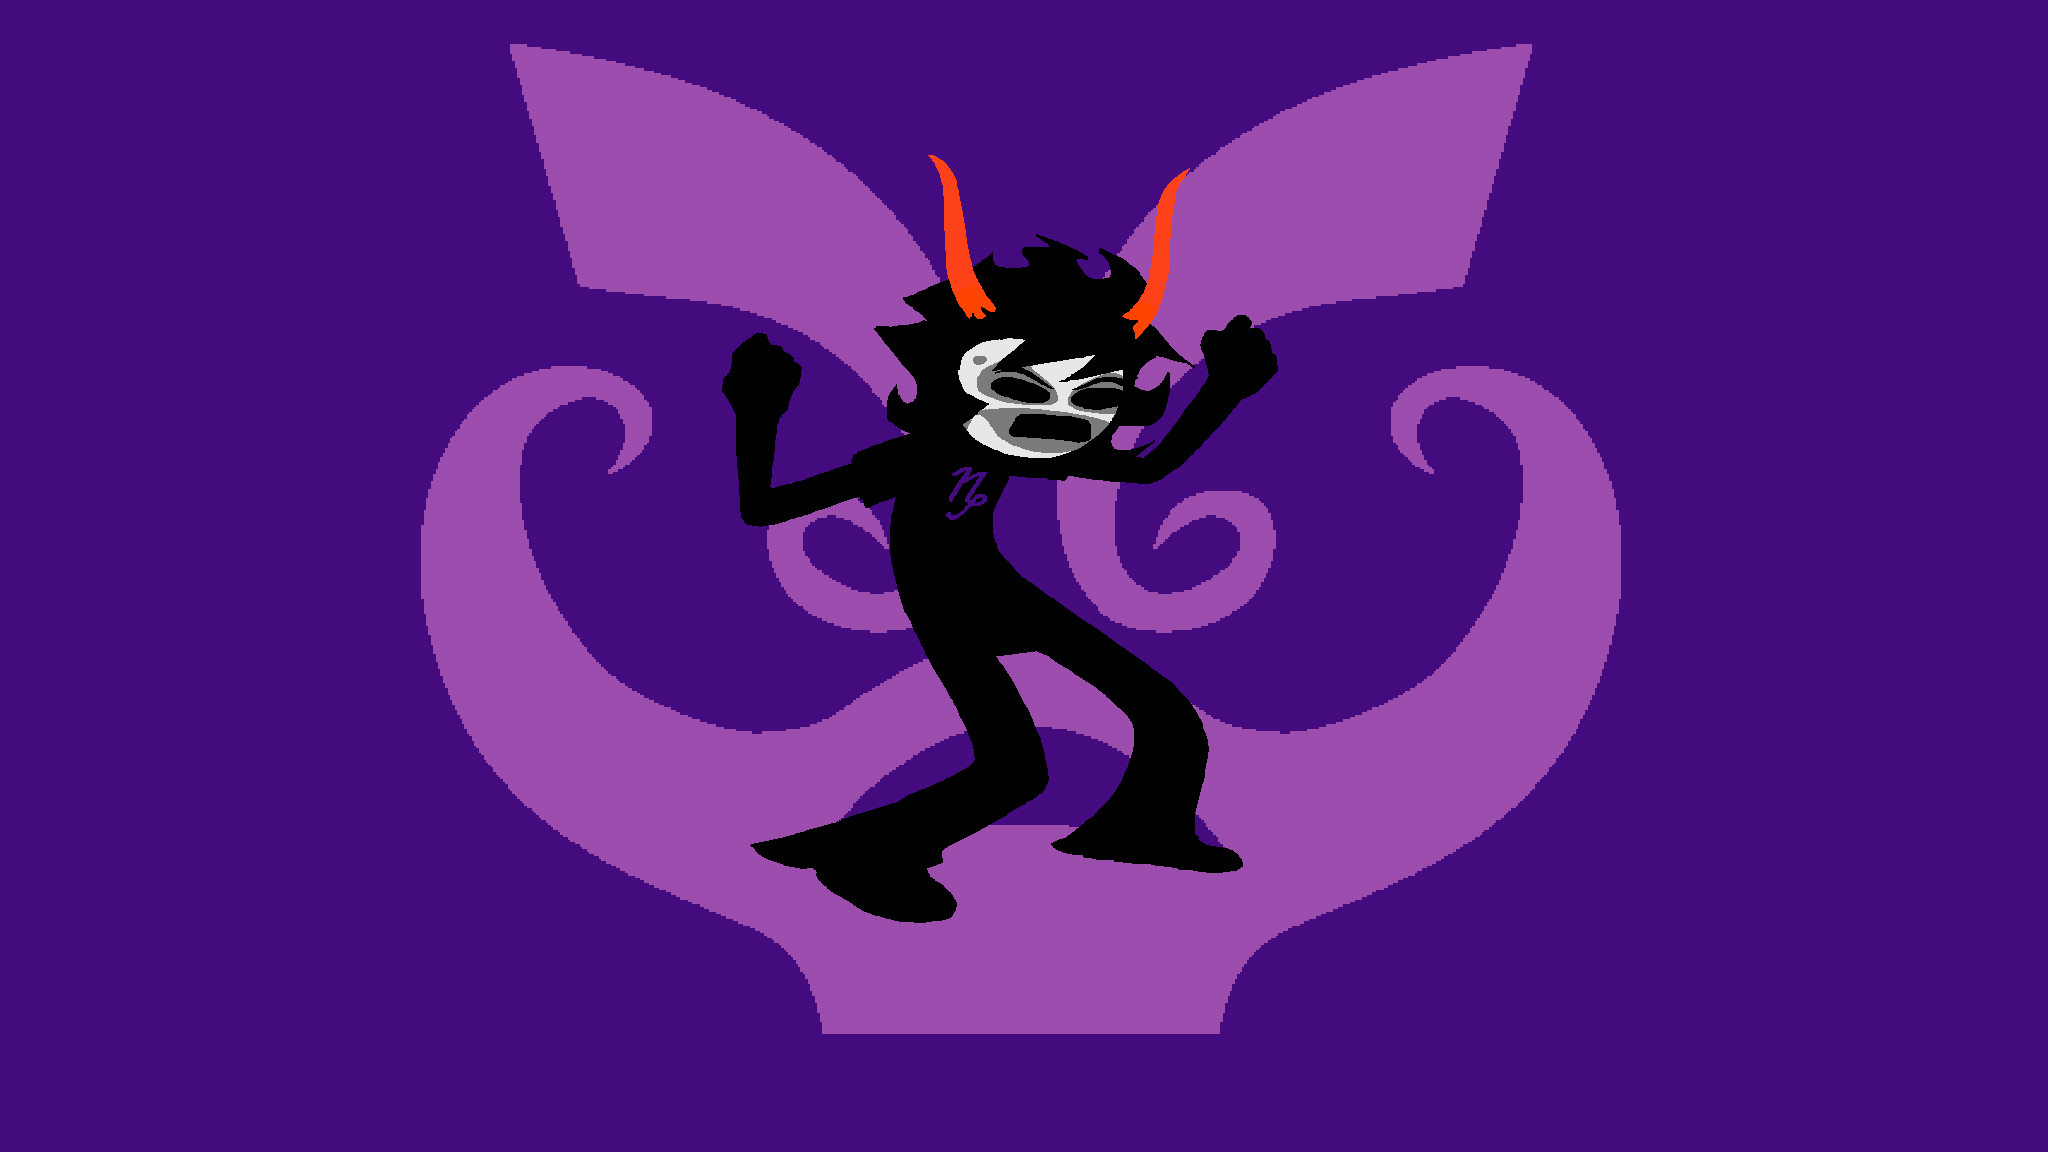 2048x1152 gamzee wallpaper hero mode by colcoction customization wallpaper other .